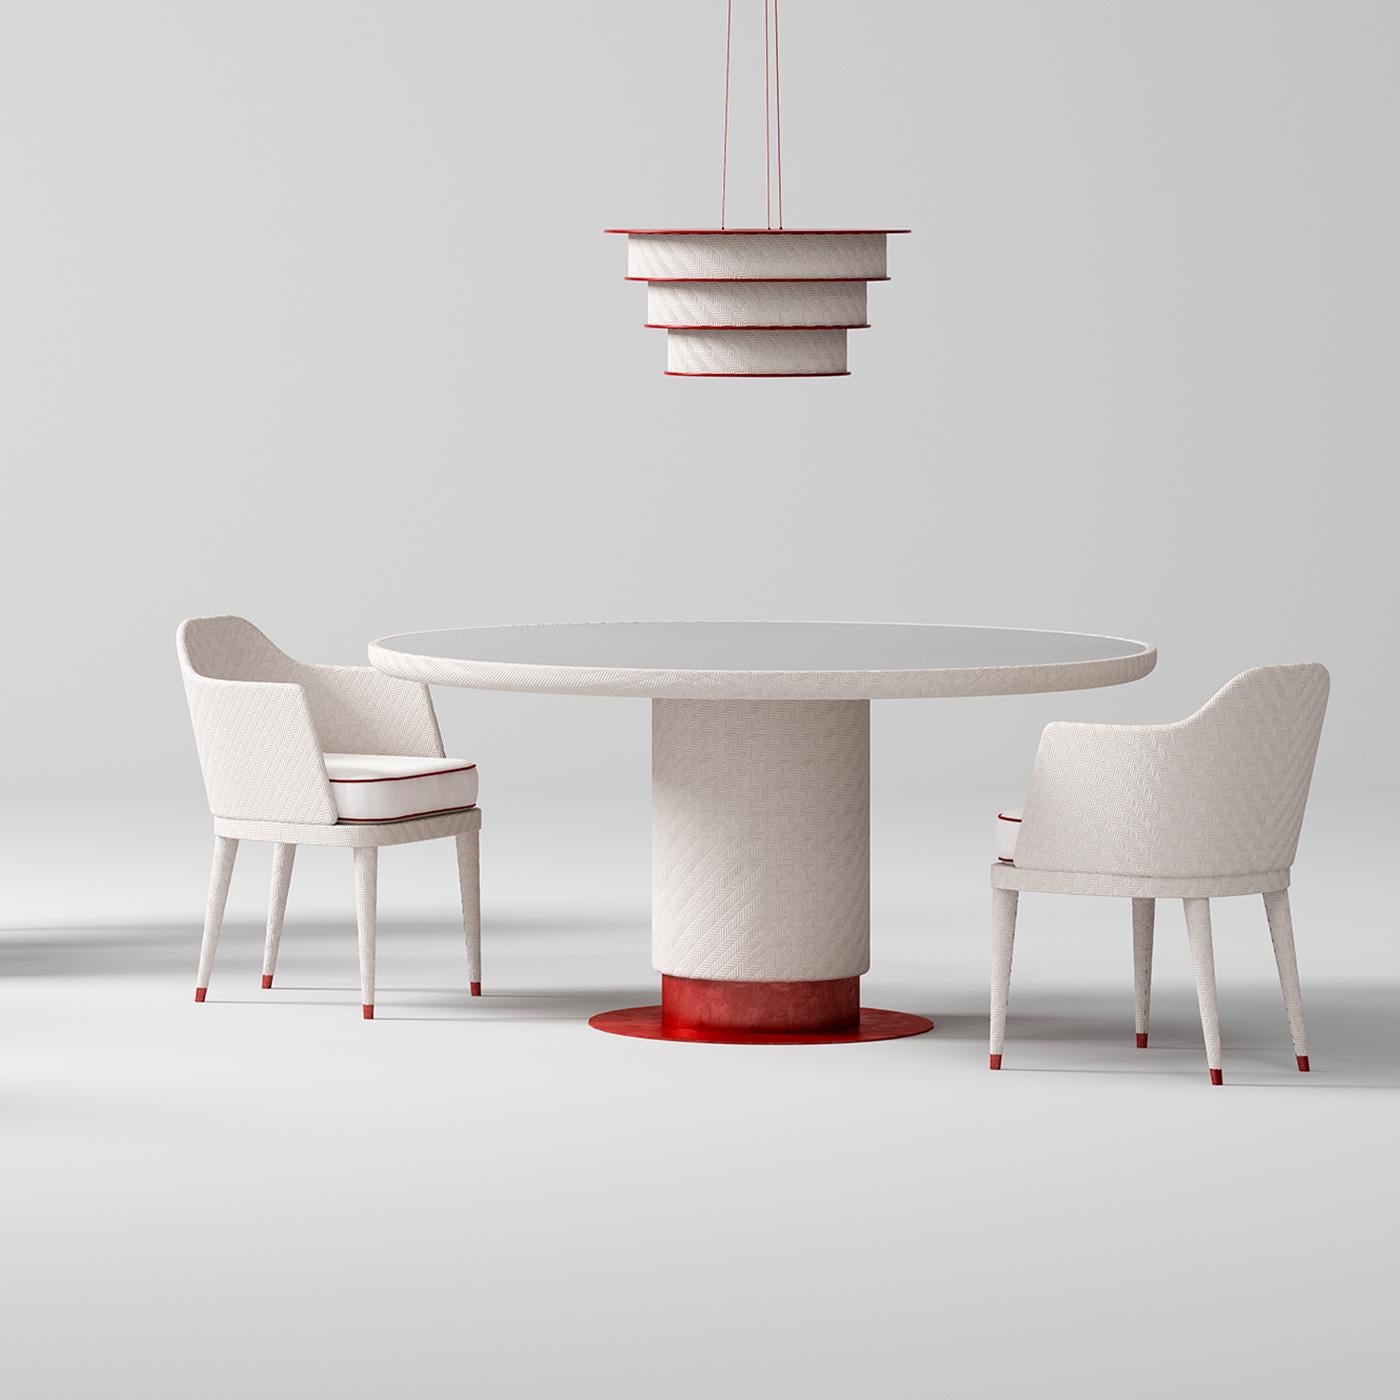 The monolithic and sculptural line of this stunning table is easily adaptable to outdoor spaces thanks to its elegant and resistant materials. Raised on a flat platform of galvanized iron polished and coated with red epoxy powder, the pedestal base